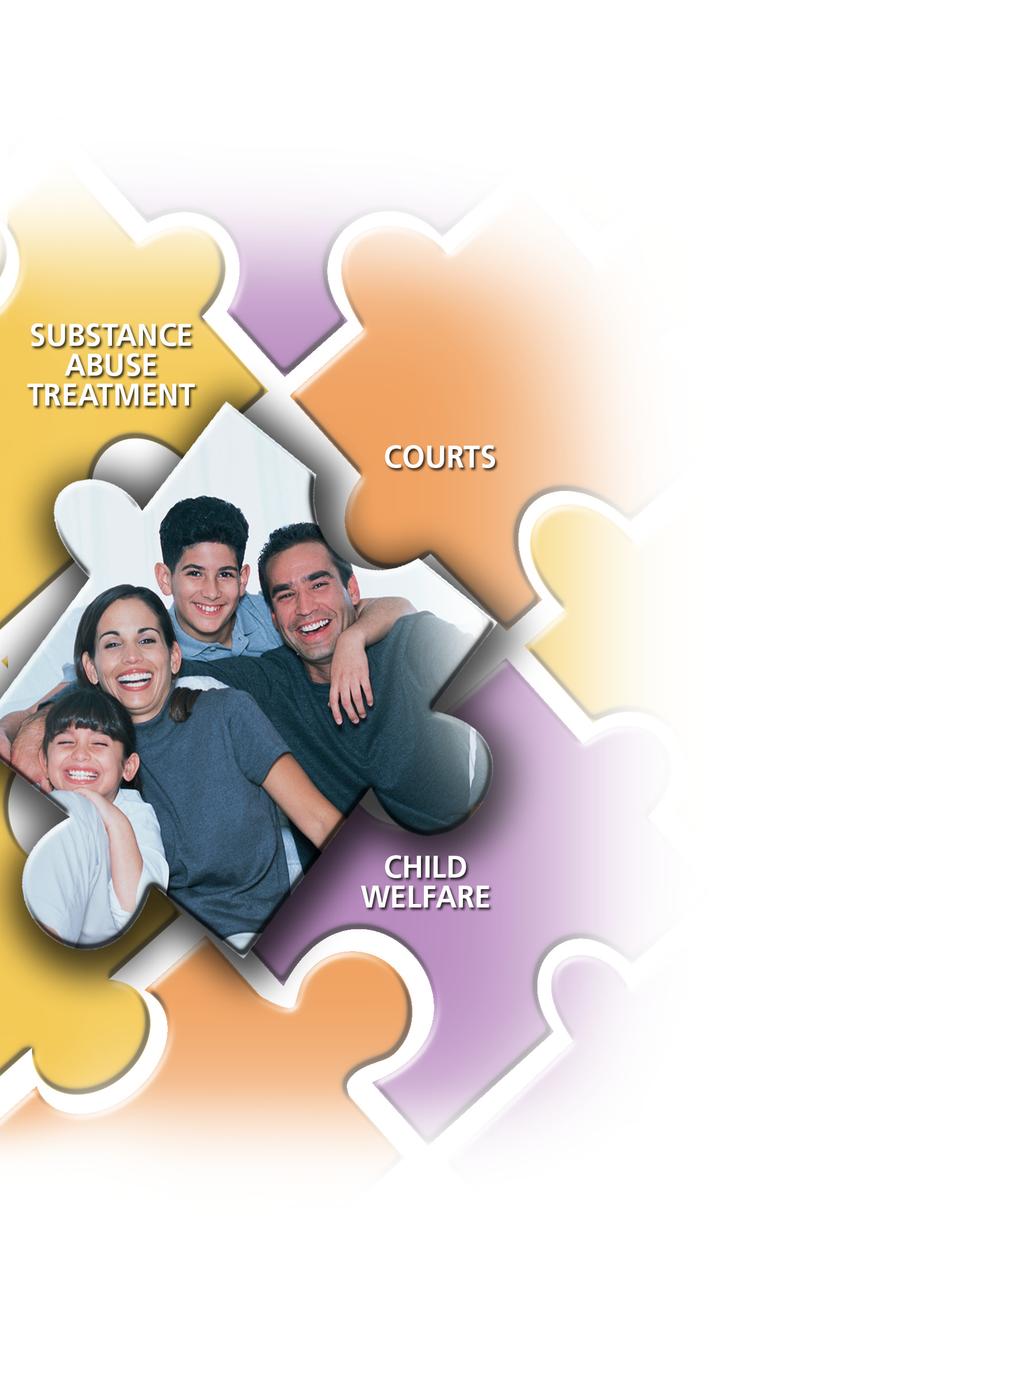 Bringing Systems Together for Family Recovery, Safety, and Stability Working together.